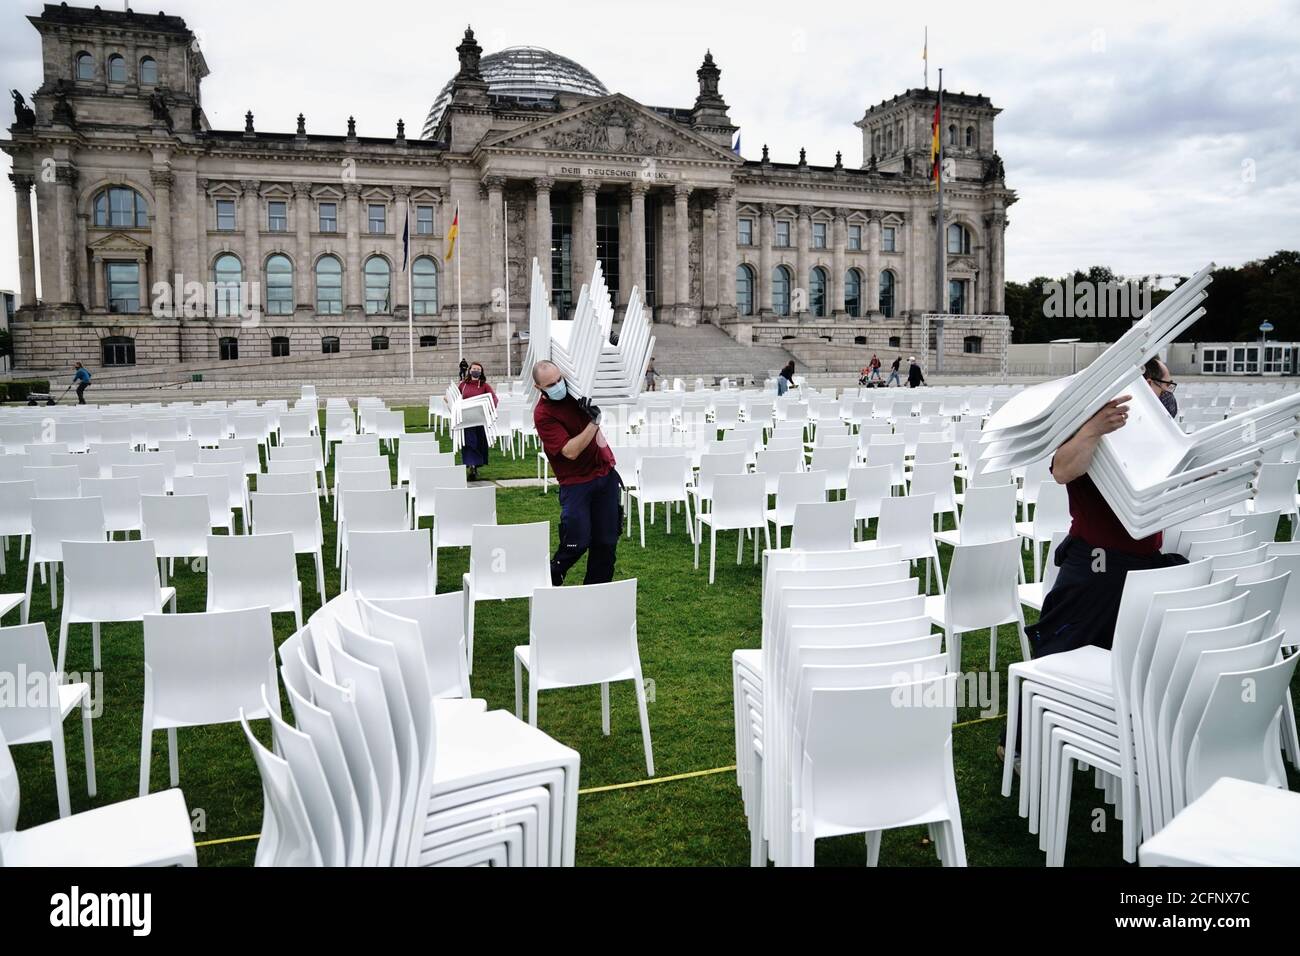 Berlin, Germany. 07th Sep, 2020. Activists set up chairs on the Platz der Republik in front of the Reichstag building. As part of the nationwide anti-racist action days of 'We'll Come United', some 13,000 chairs will be placed here in front of the Bundestag later this afternoon. The chairs symbolise the people who currently live in Moria, as well as the square and the receptiveness of the cities, states and civil society. Organised jointly by Seebrücke, Sea-Watch, #LeaveNoOneBehind and Campact. Credit: Kay Nietfeld/dpa/Alamy Live News Stock Photo